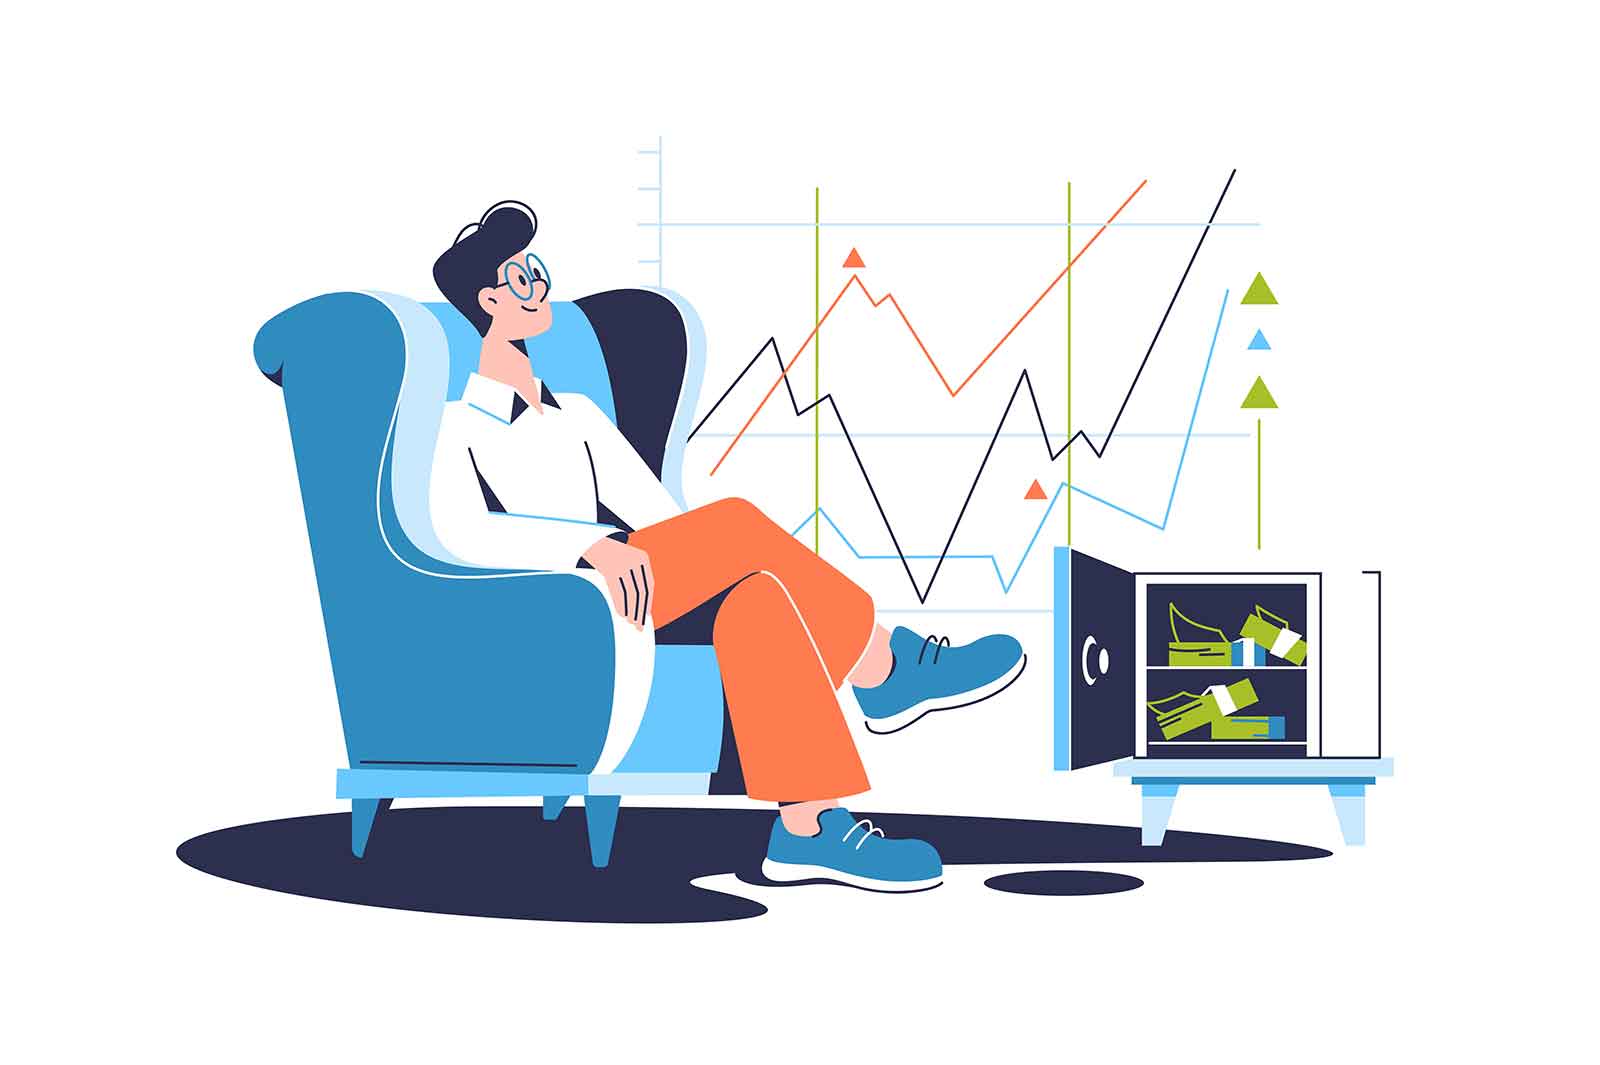 Man calmly watches the graphs of investments, vector illustration. Man sits in chair nearby the safe with packs of money.